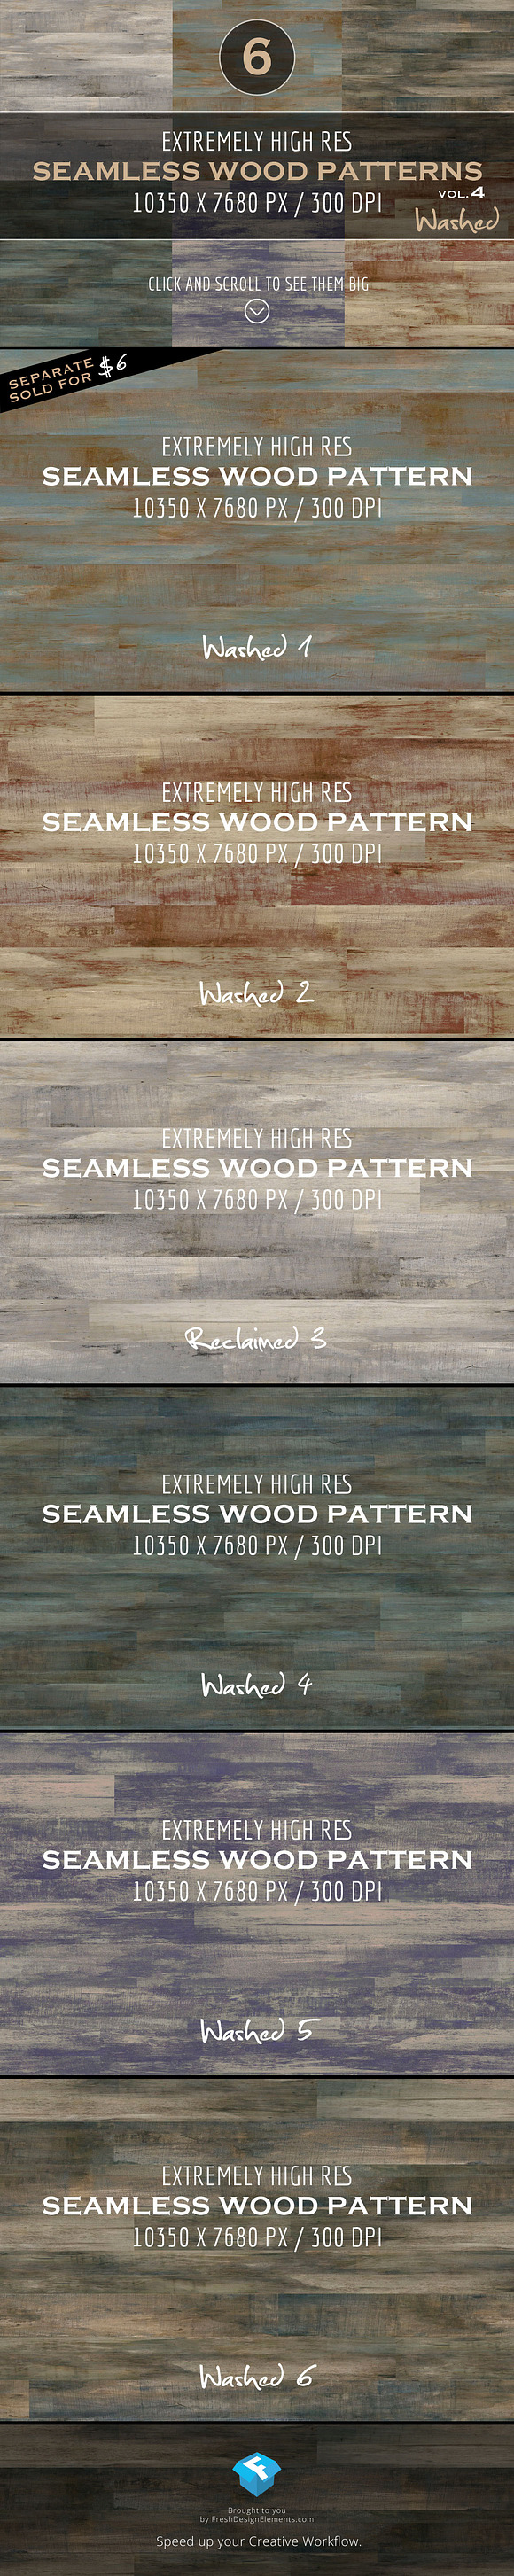 Extremely HR Wood Patterns vol. 4 - Patterns